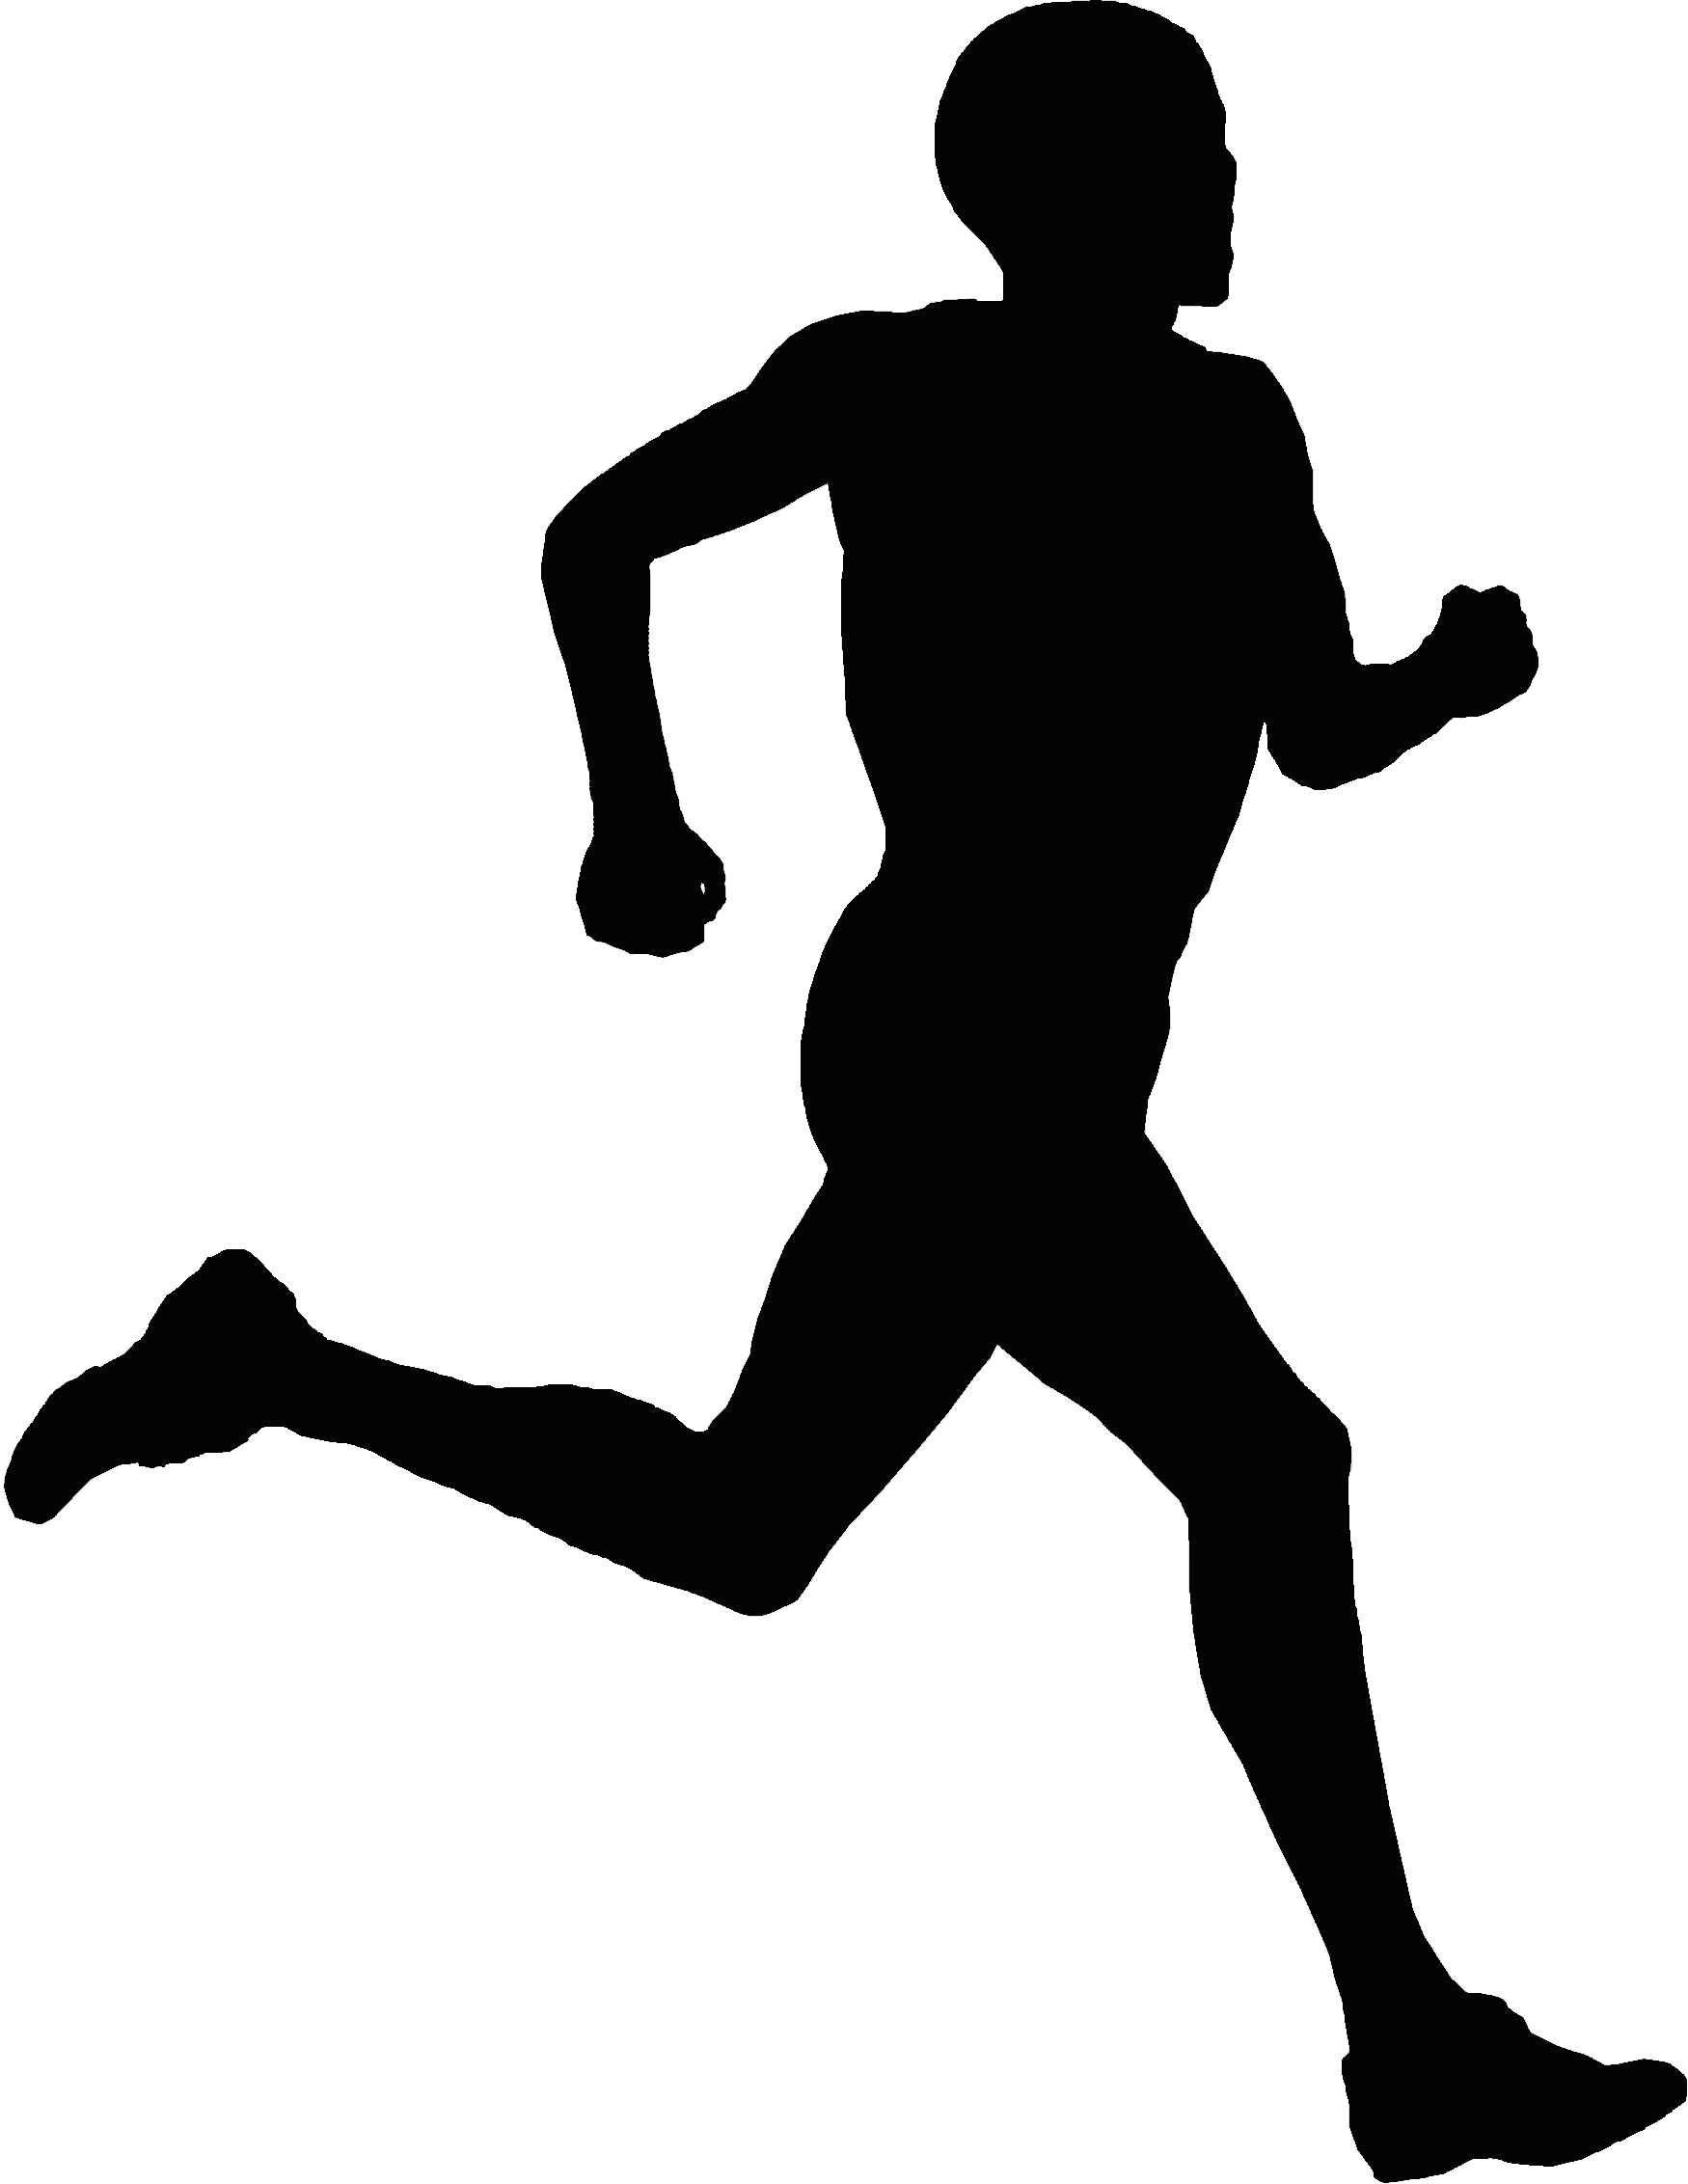 Runners group cliparts and. Runner clipart sport psychology